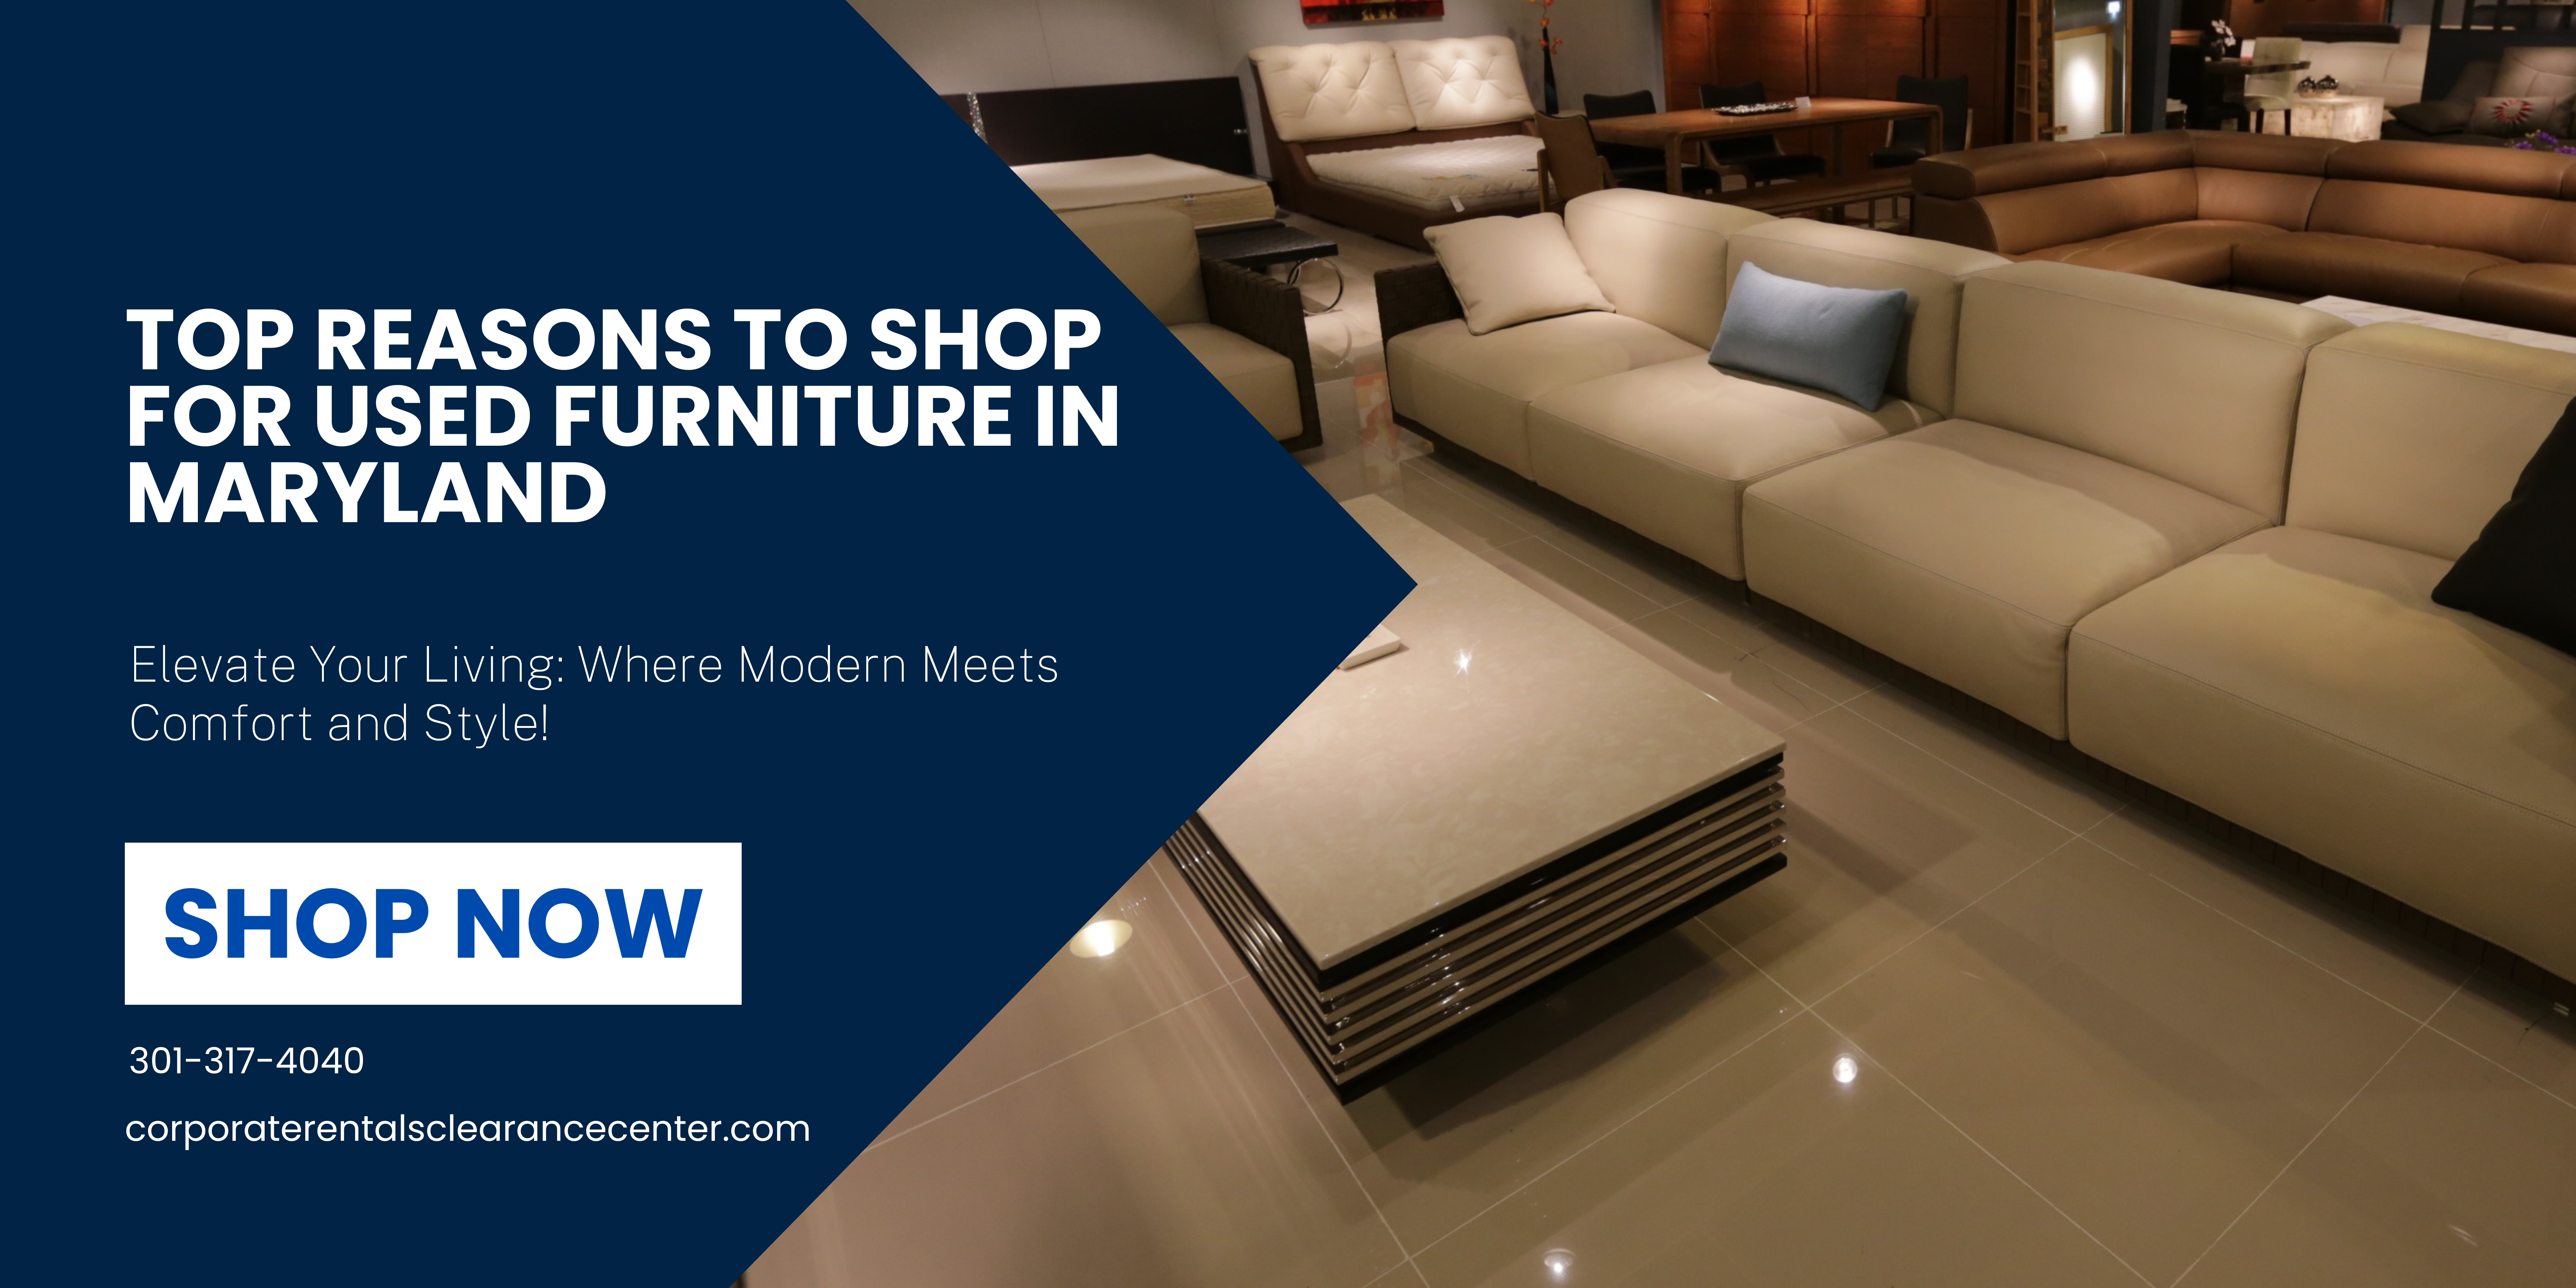 Top Reasons to Shop Used Furniture in Maryland